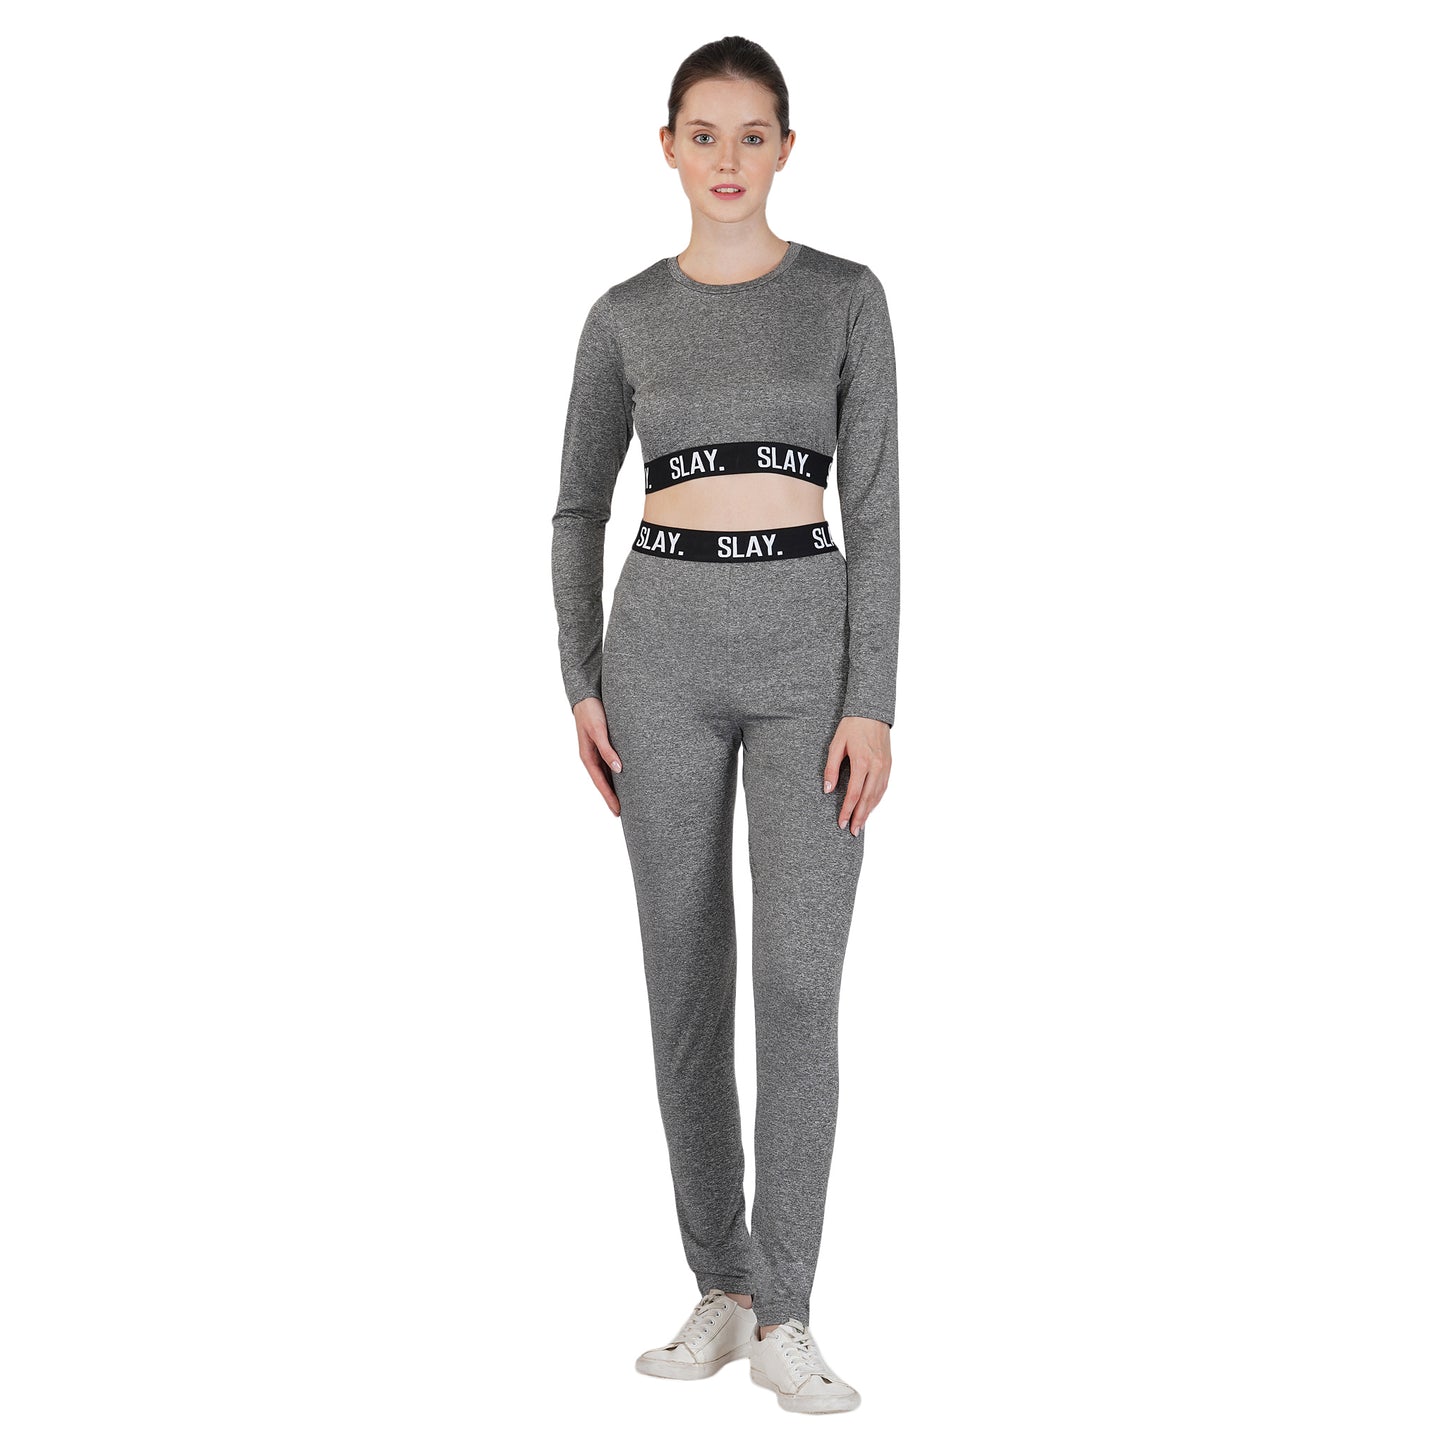 SLAY. Sport Women's Activewear Full Sleeves Crop Top And Pants Co ord Set